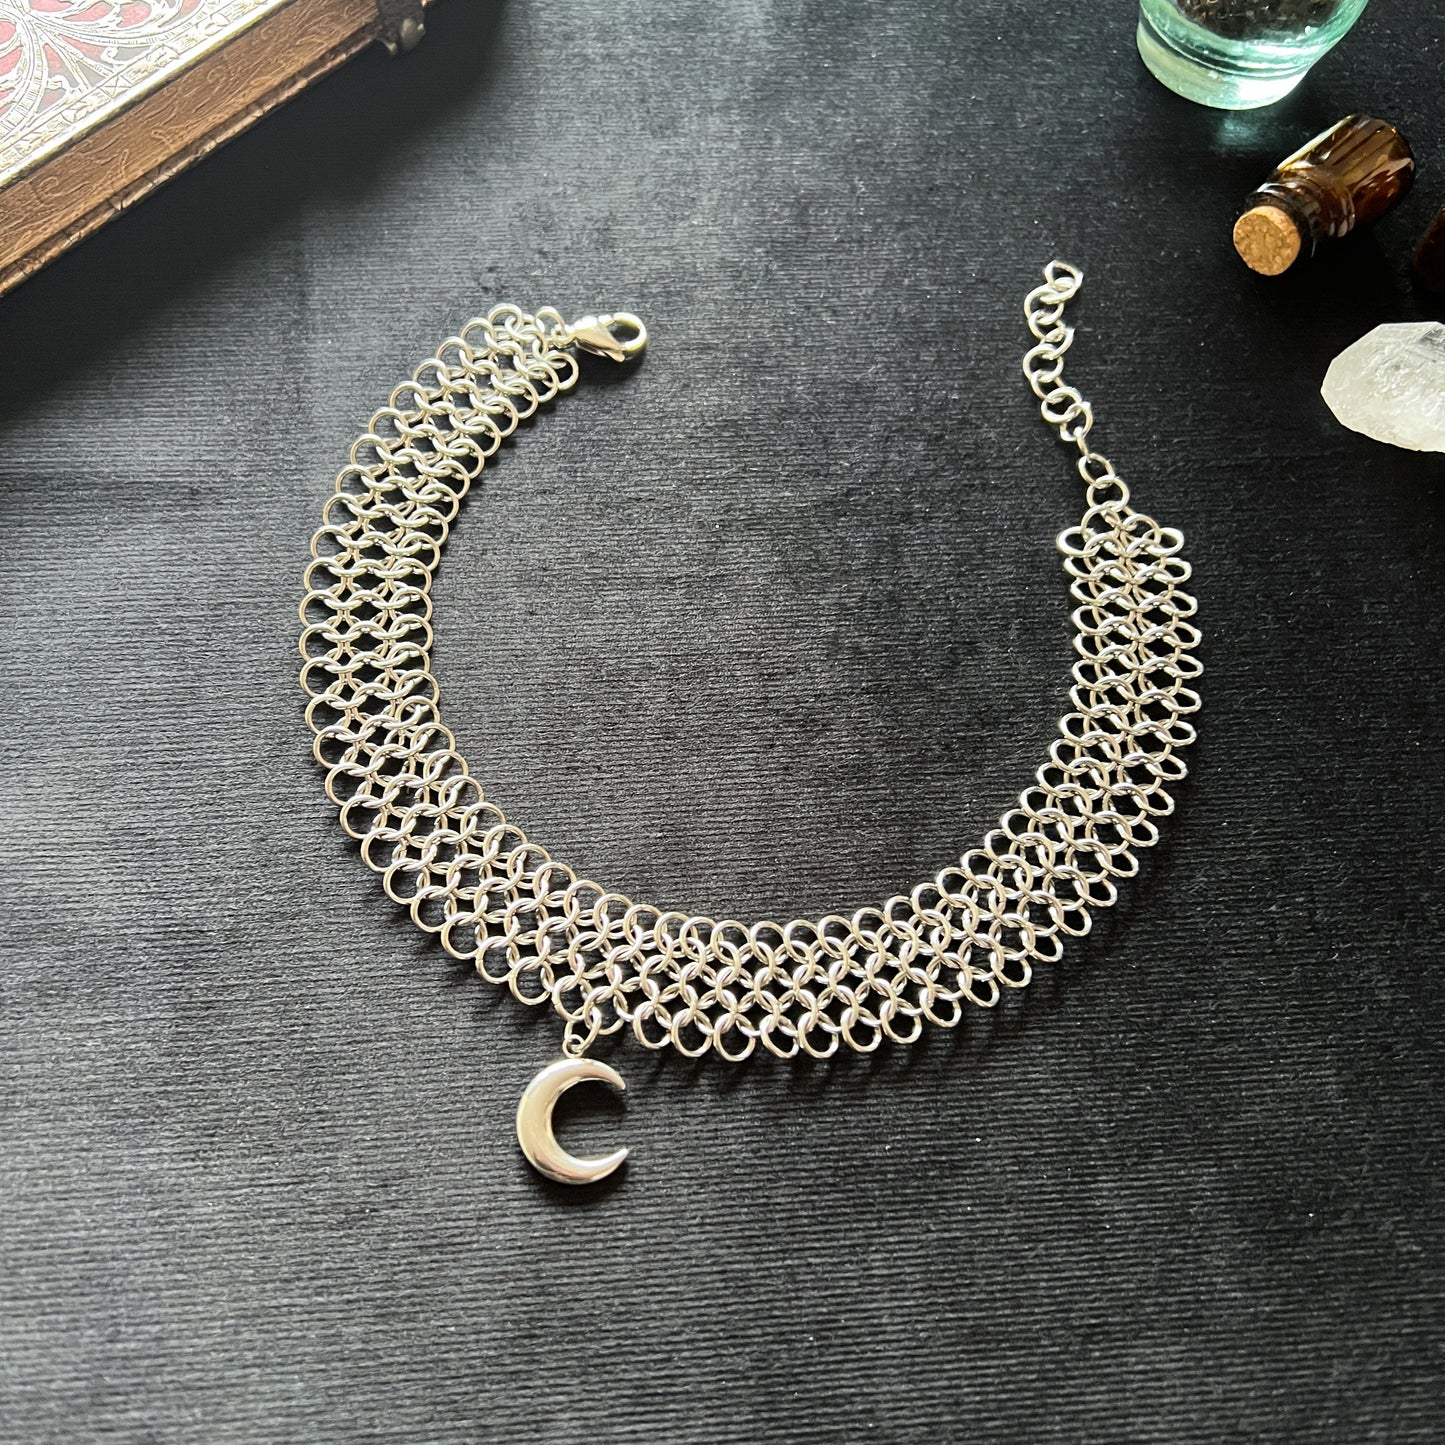 Moon crescent chainmail choker made of stainless steel European 4 in 1 chainmaille necklace gothic jewelry